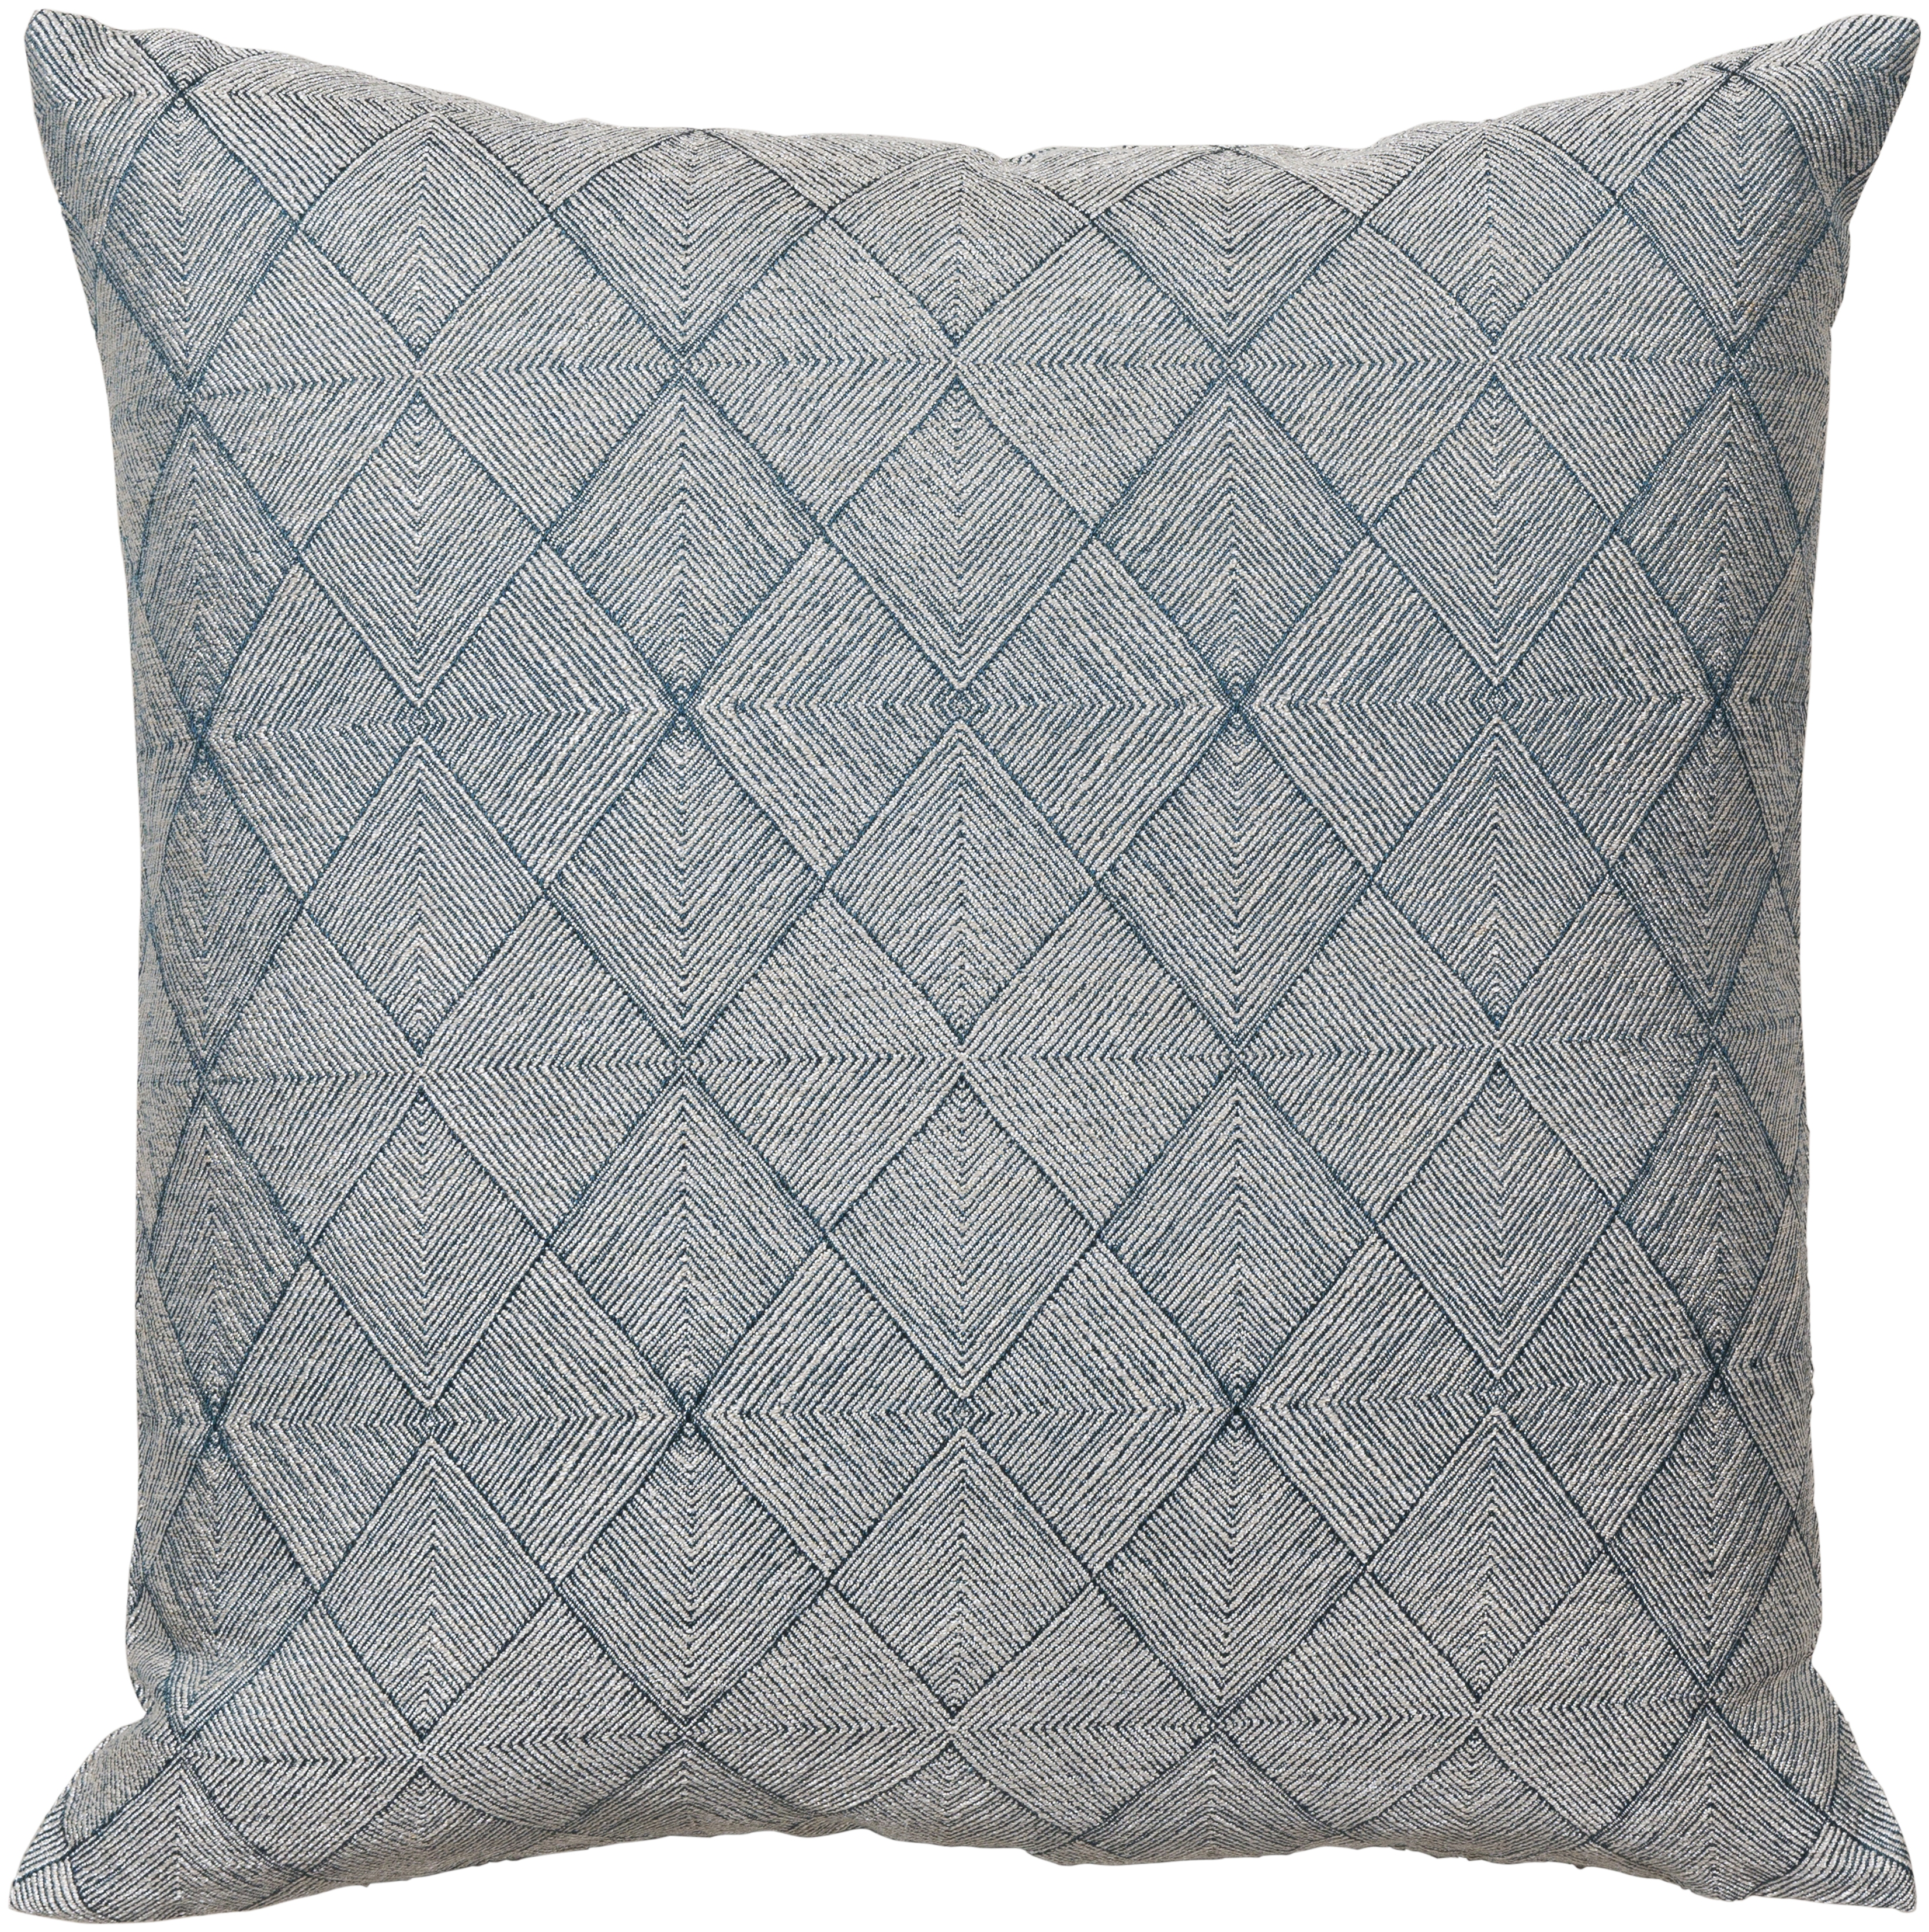 Messina 22x22 Pillow with Down Insert - Image 0